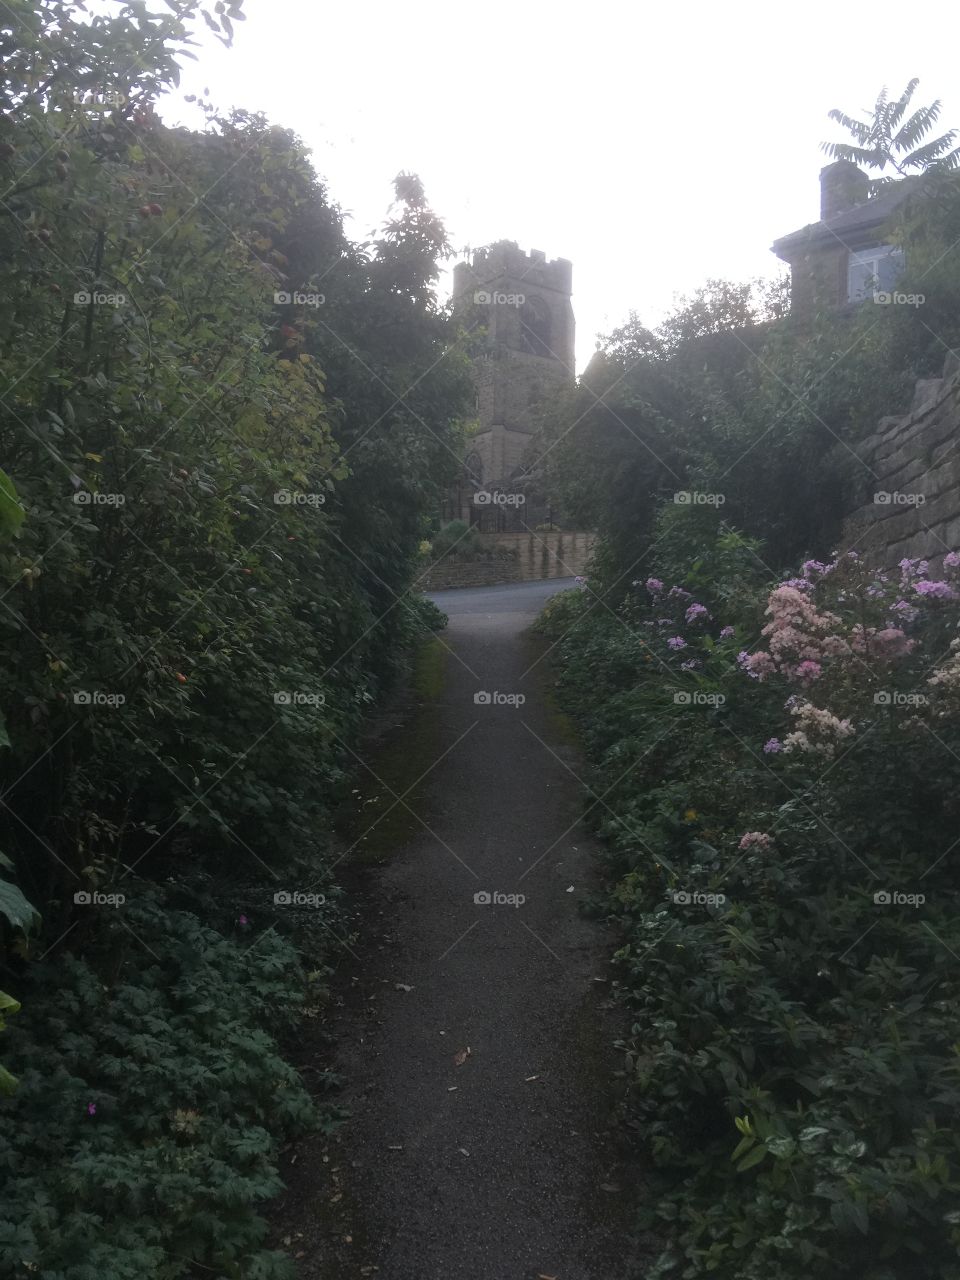 View of the Church. Summer in England 